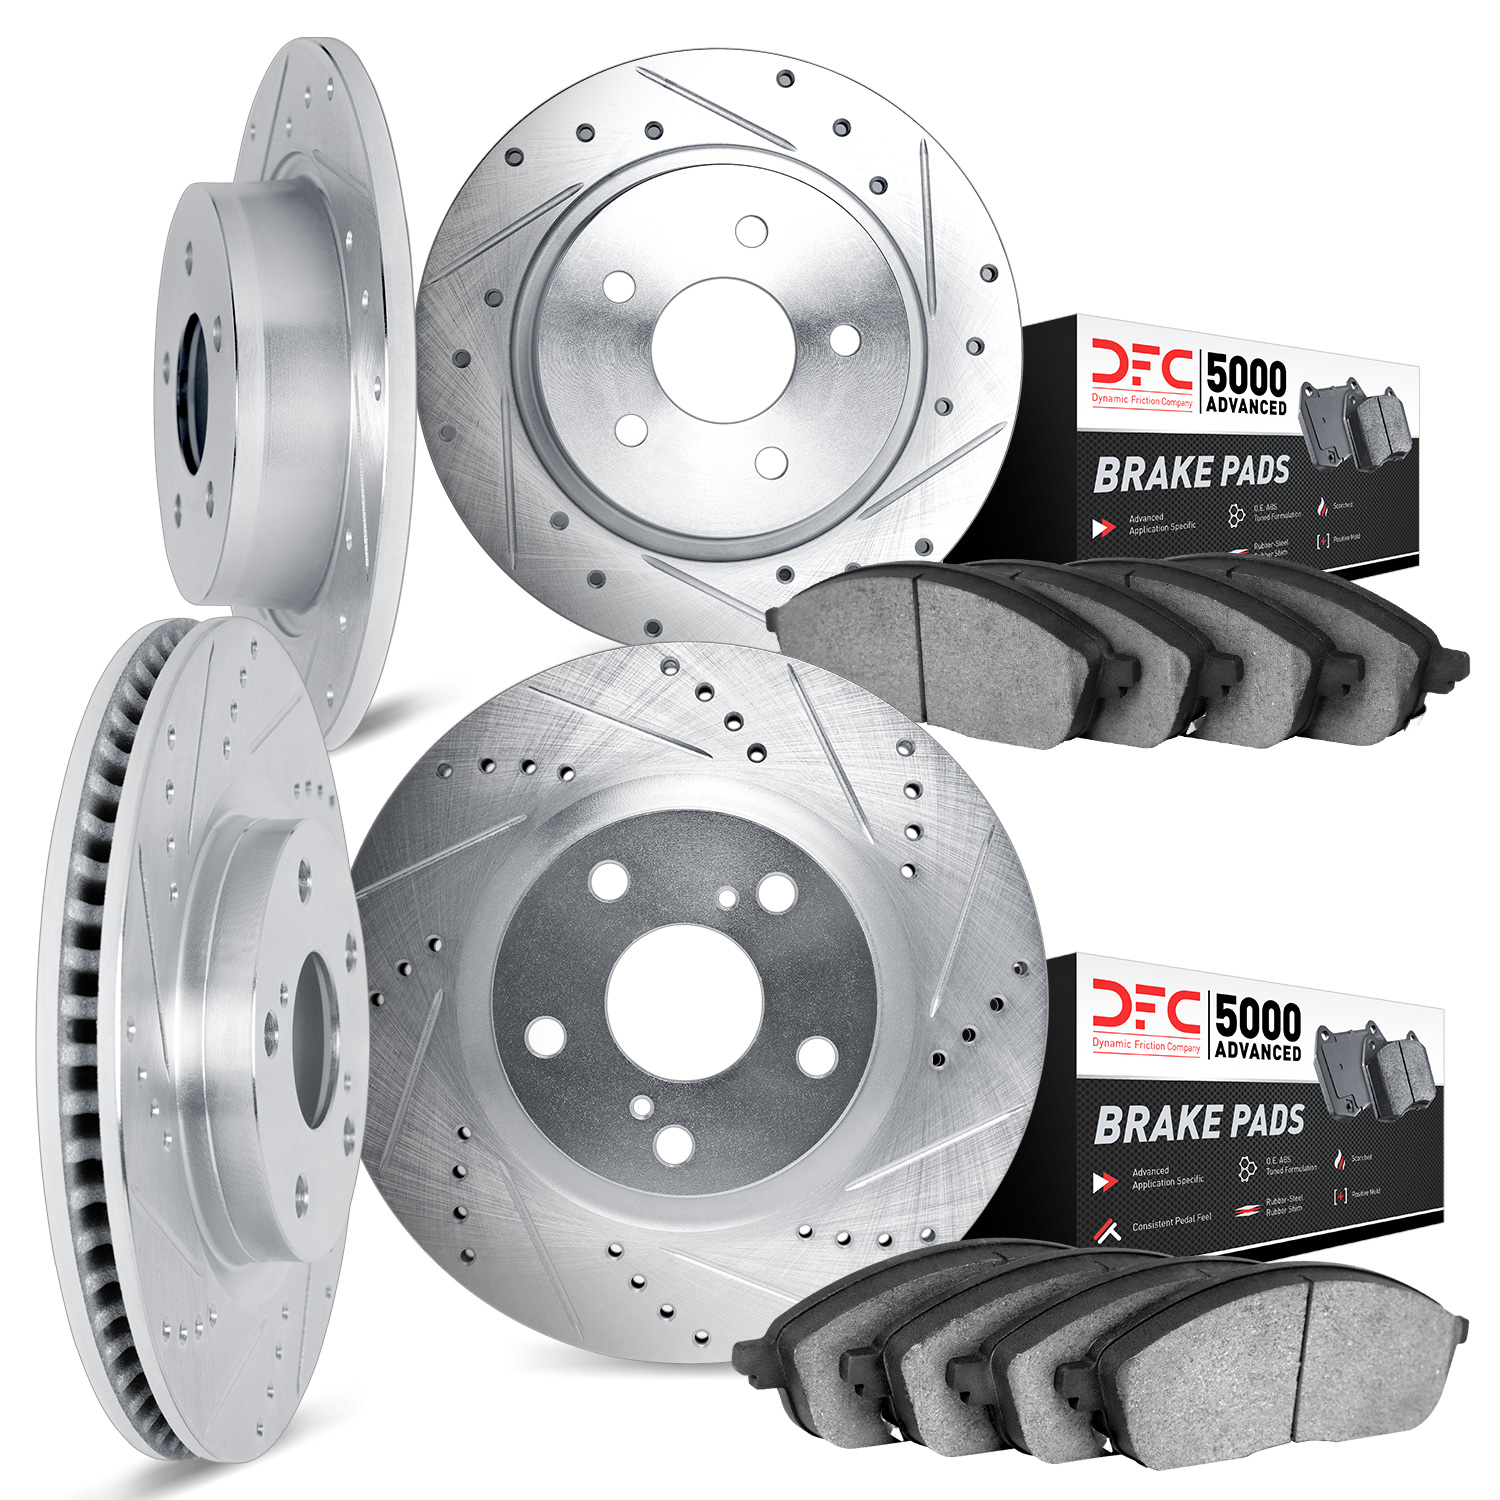 7504-59050 Drilled/Slotted Brake Rotors w/5000 Advanced Brake Pads Kit [Silver], 2011-2014 Acura/Honda, Position: Front and Rear